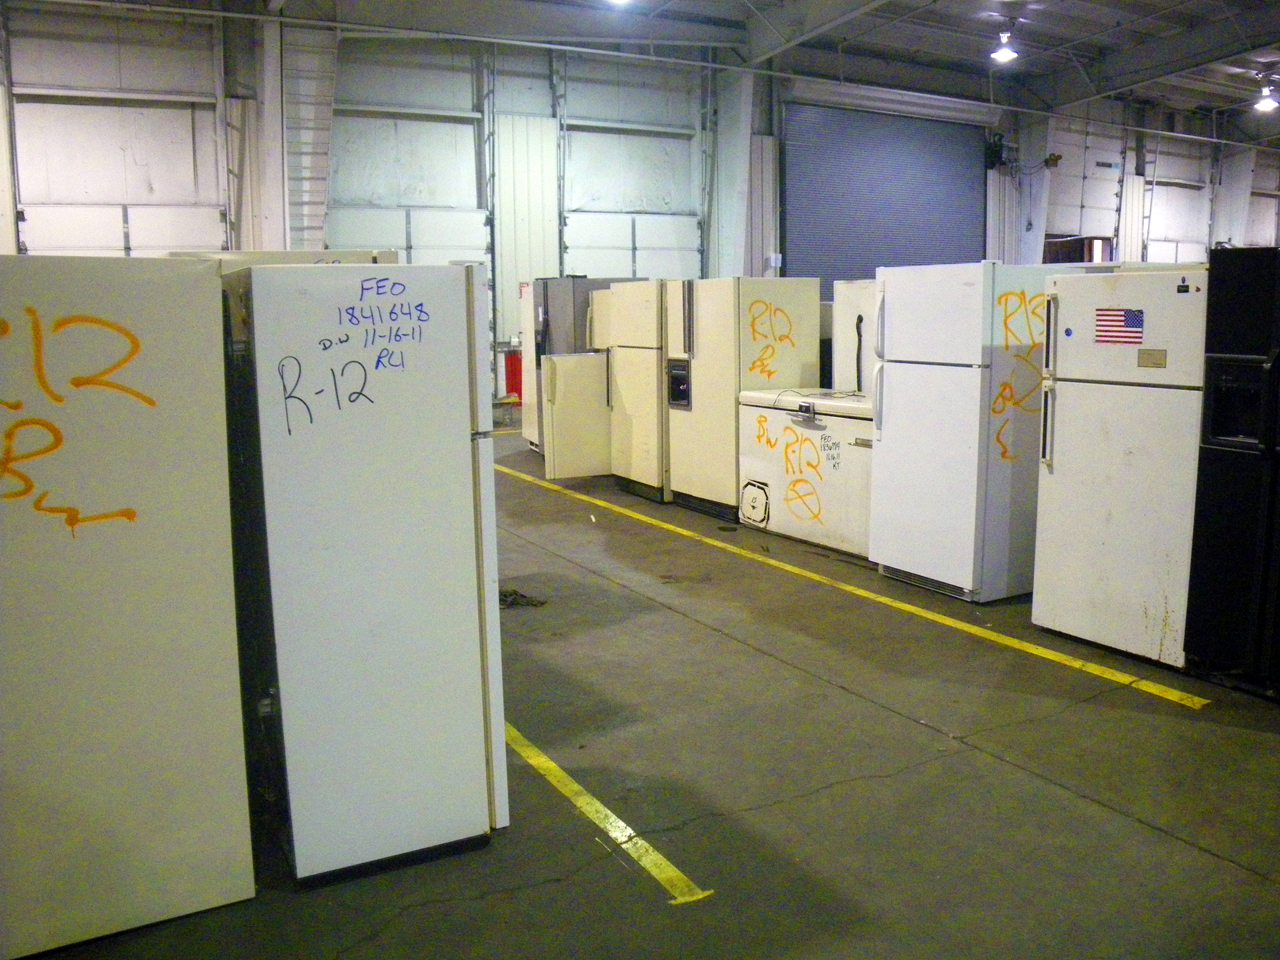 Refrigerators to be recycled